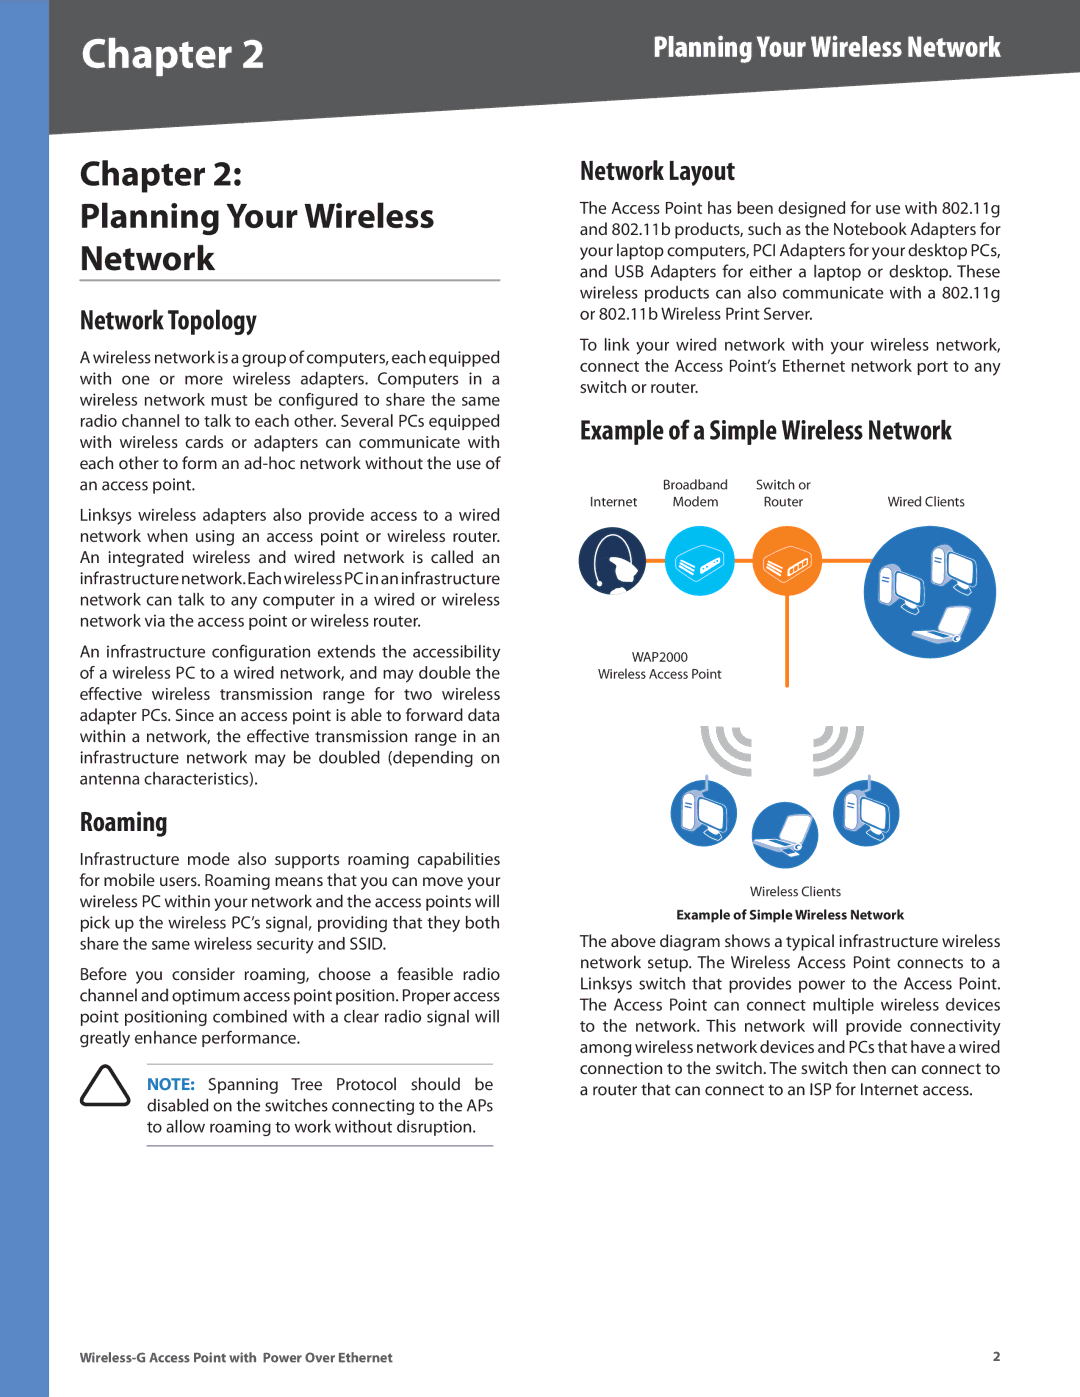 Linksys WAP2000 manual Chapter Planning Your Wireless Network, Network Topology, Roaming, Network Layout 